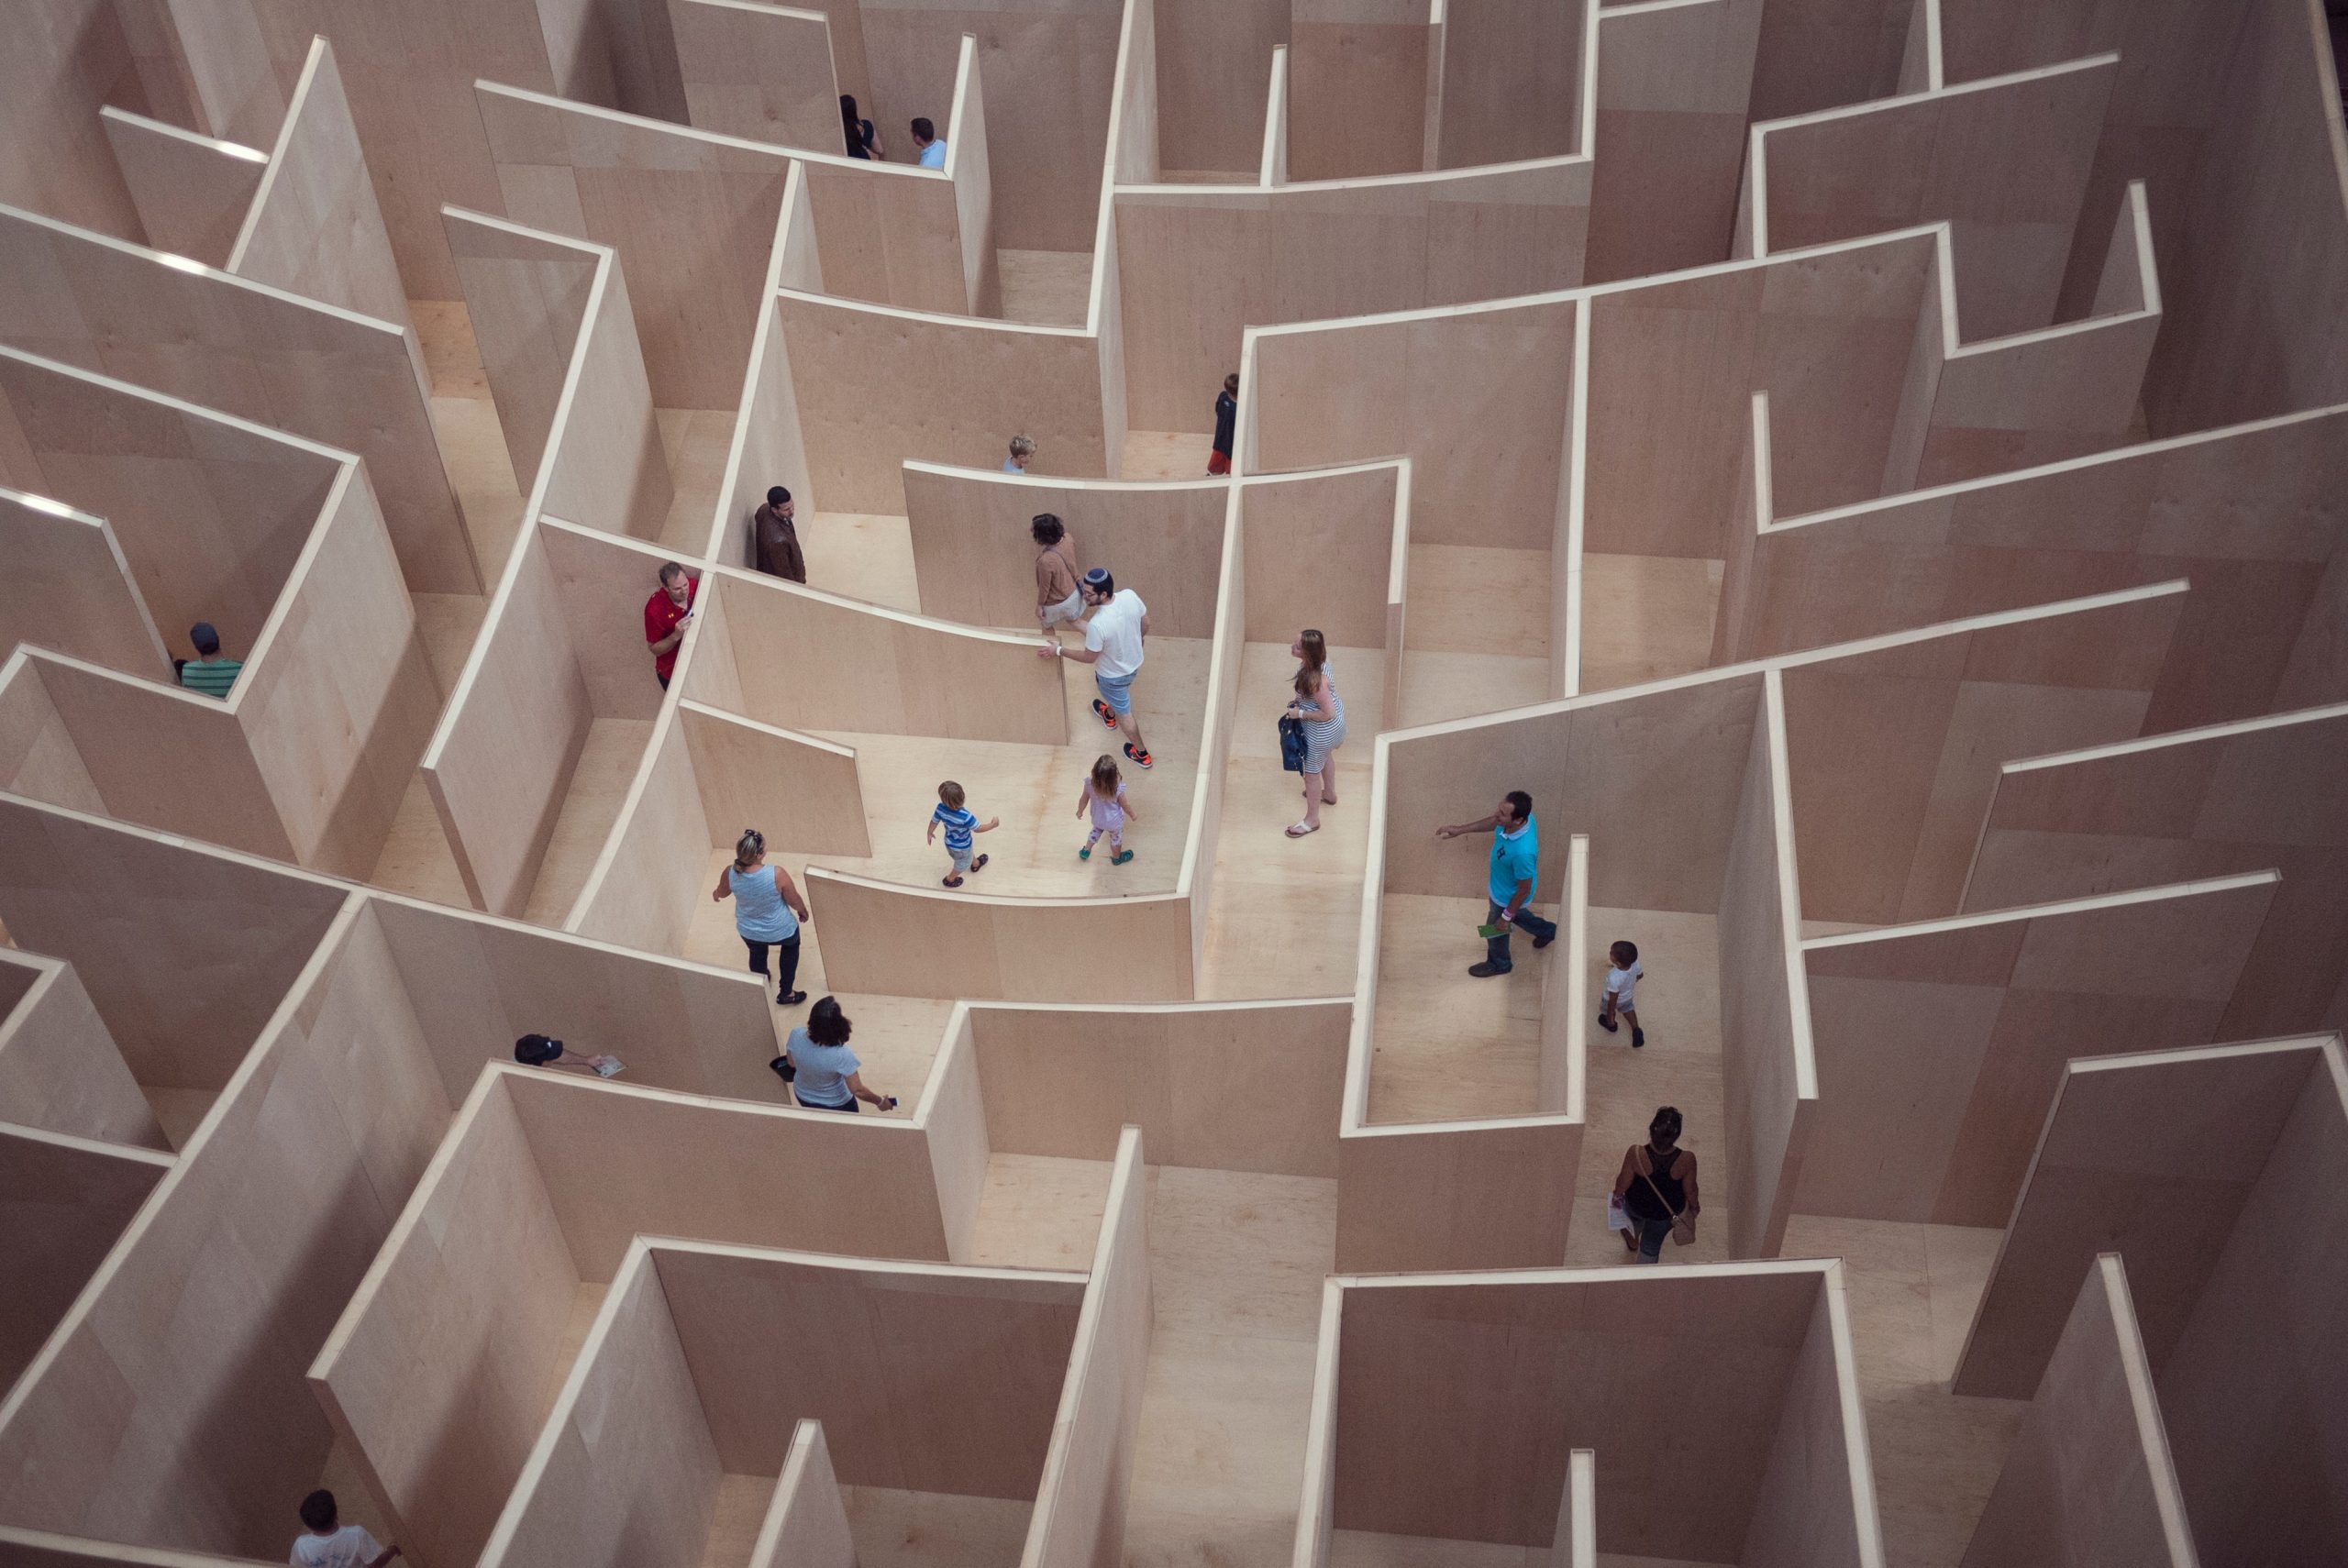 Doing business can sometimes feel like you’re in a maze